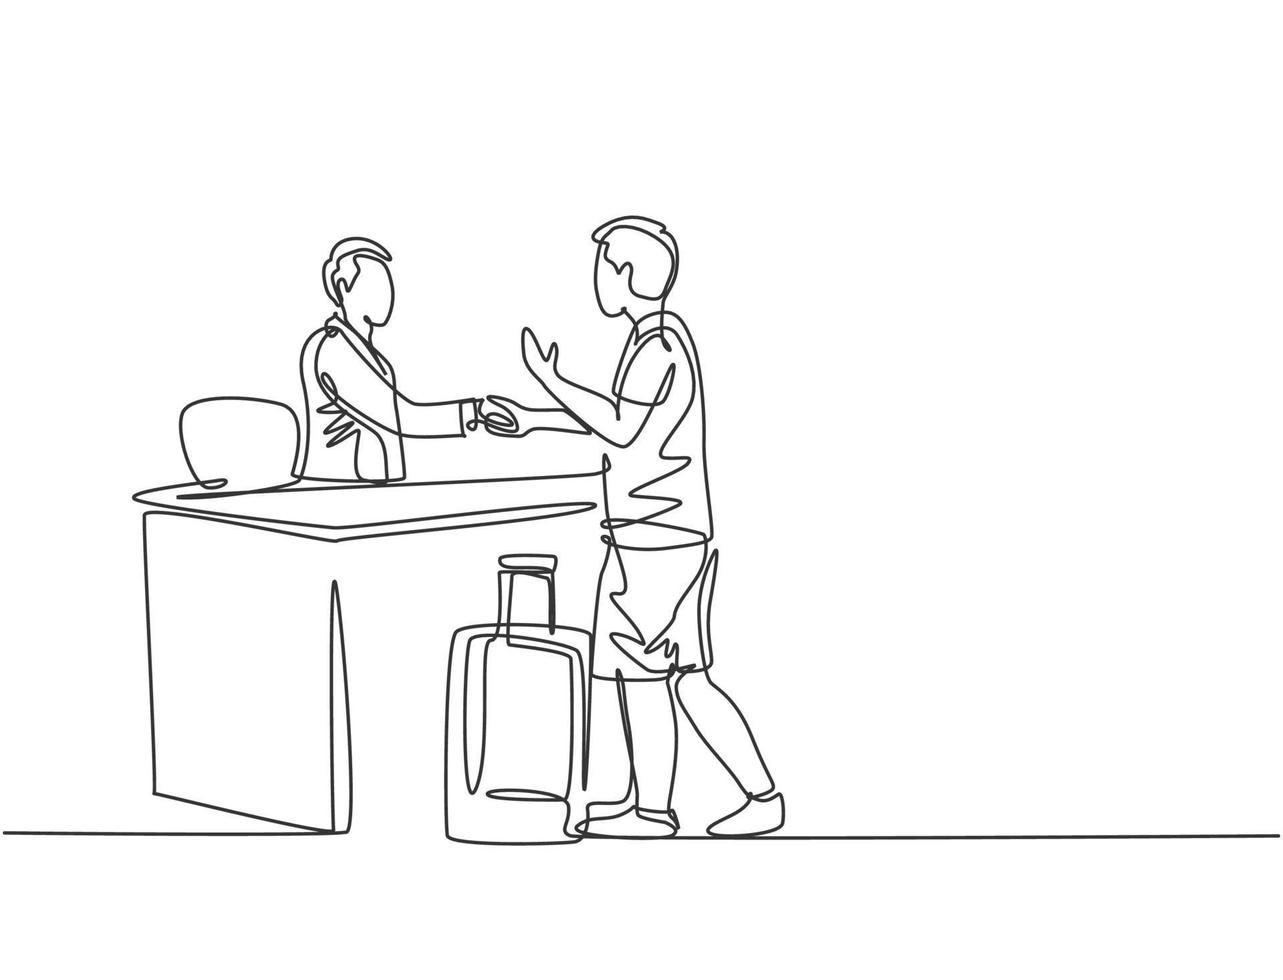 One line drawing of young male tourist handshaking hotel receptionist and ask to book a room while holding a luggage. Travelling concept. Modern continuous line drawing graphic vector illustration